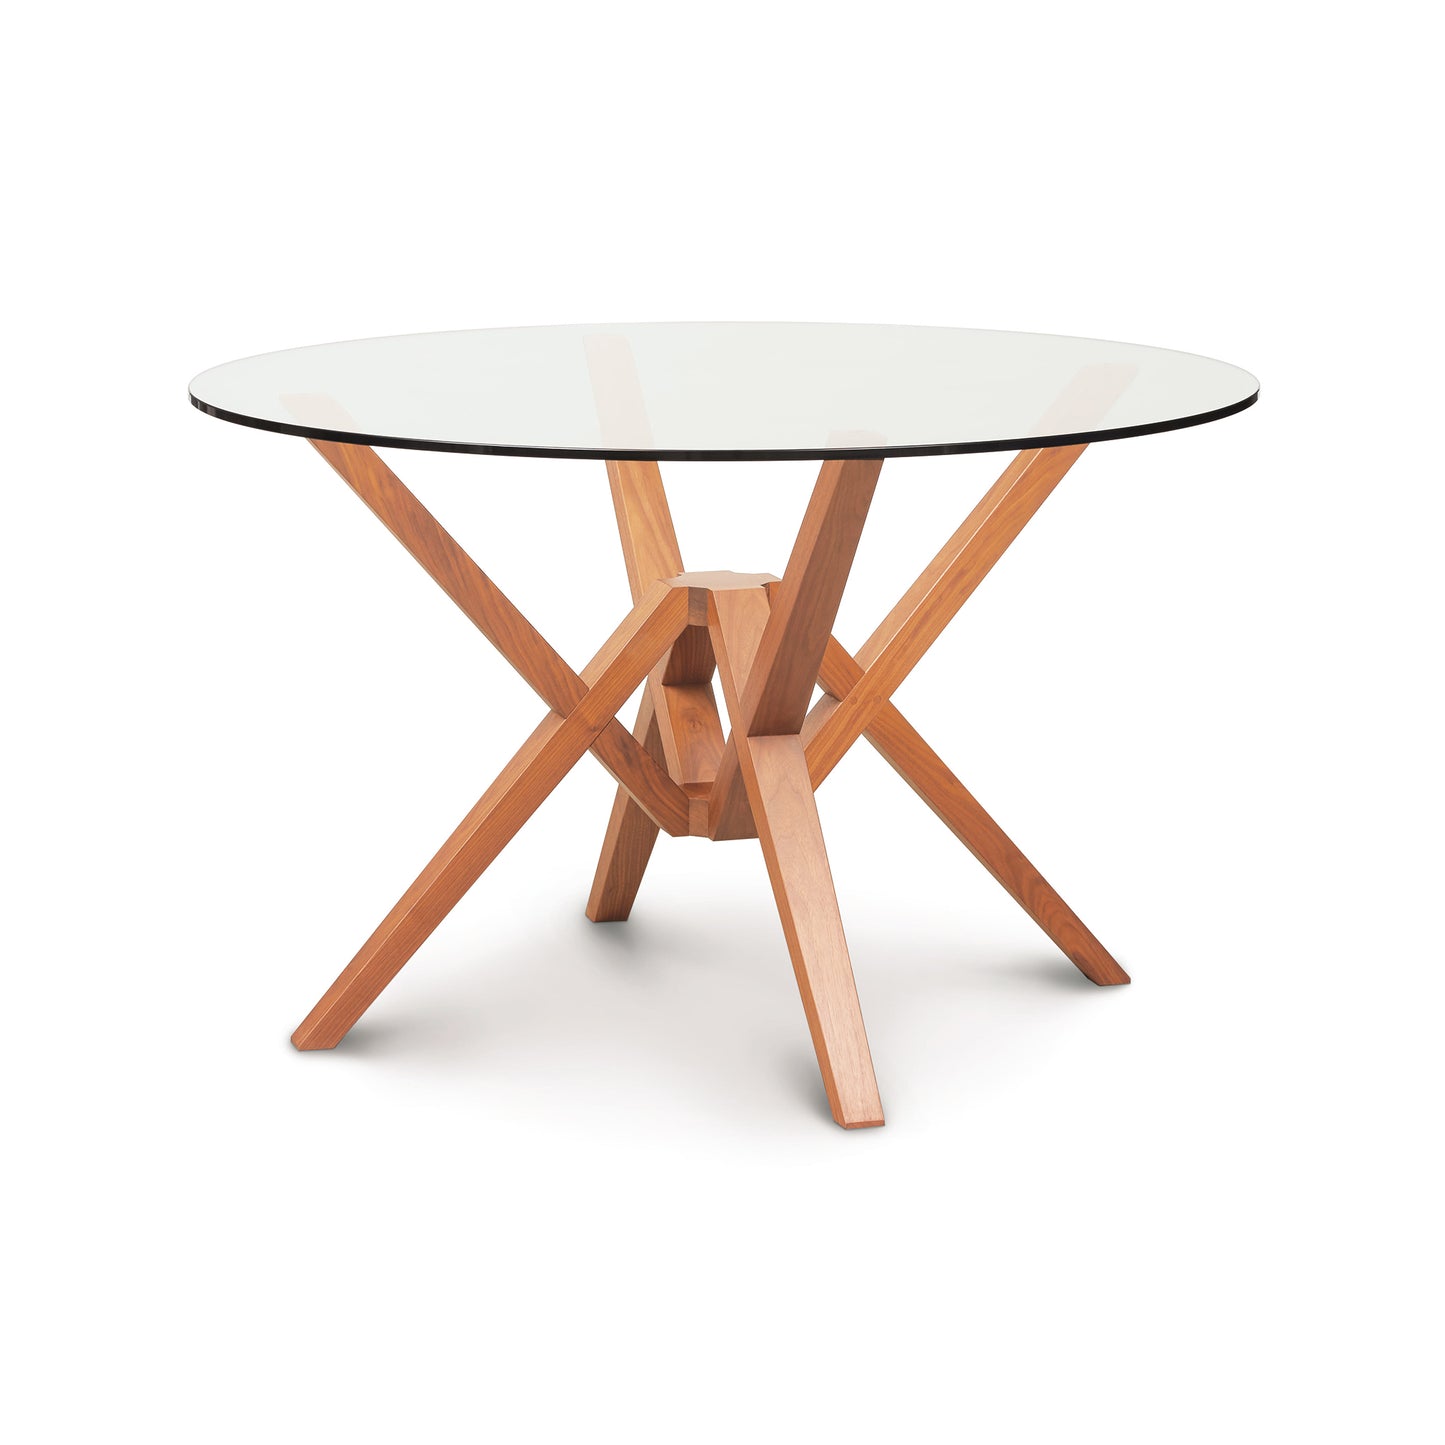 The Copeland Furniture Exeter Round Glass Top Table showcases innovative engineering with its isometric design. The table features a glass top and wooden legs, seamlessly blending modern style with traditional elements.